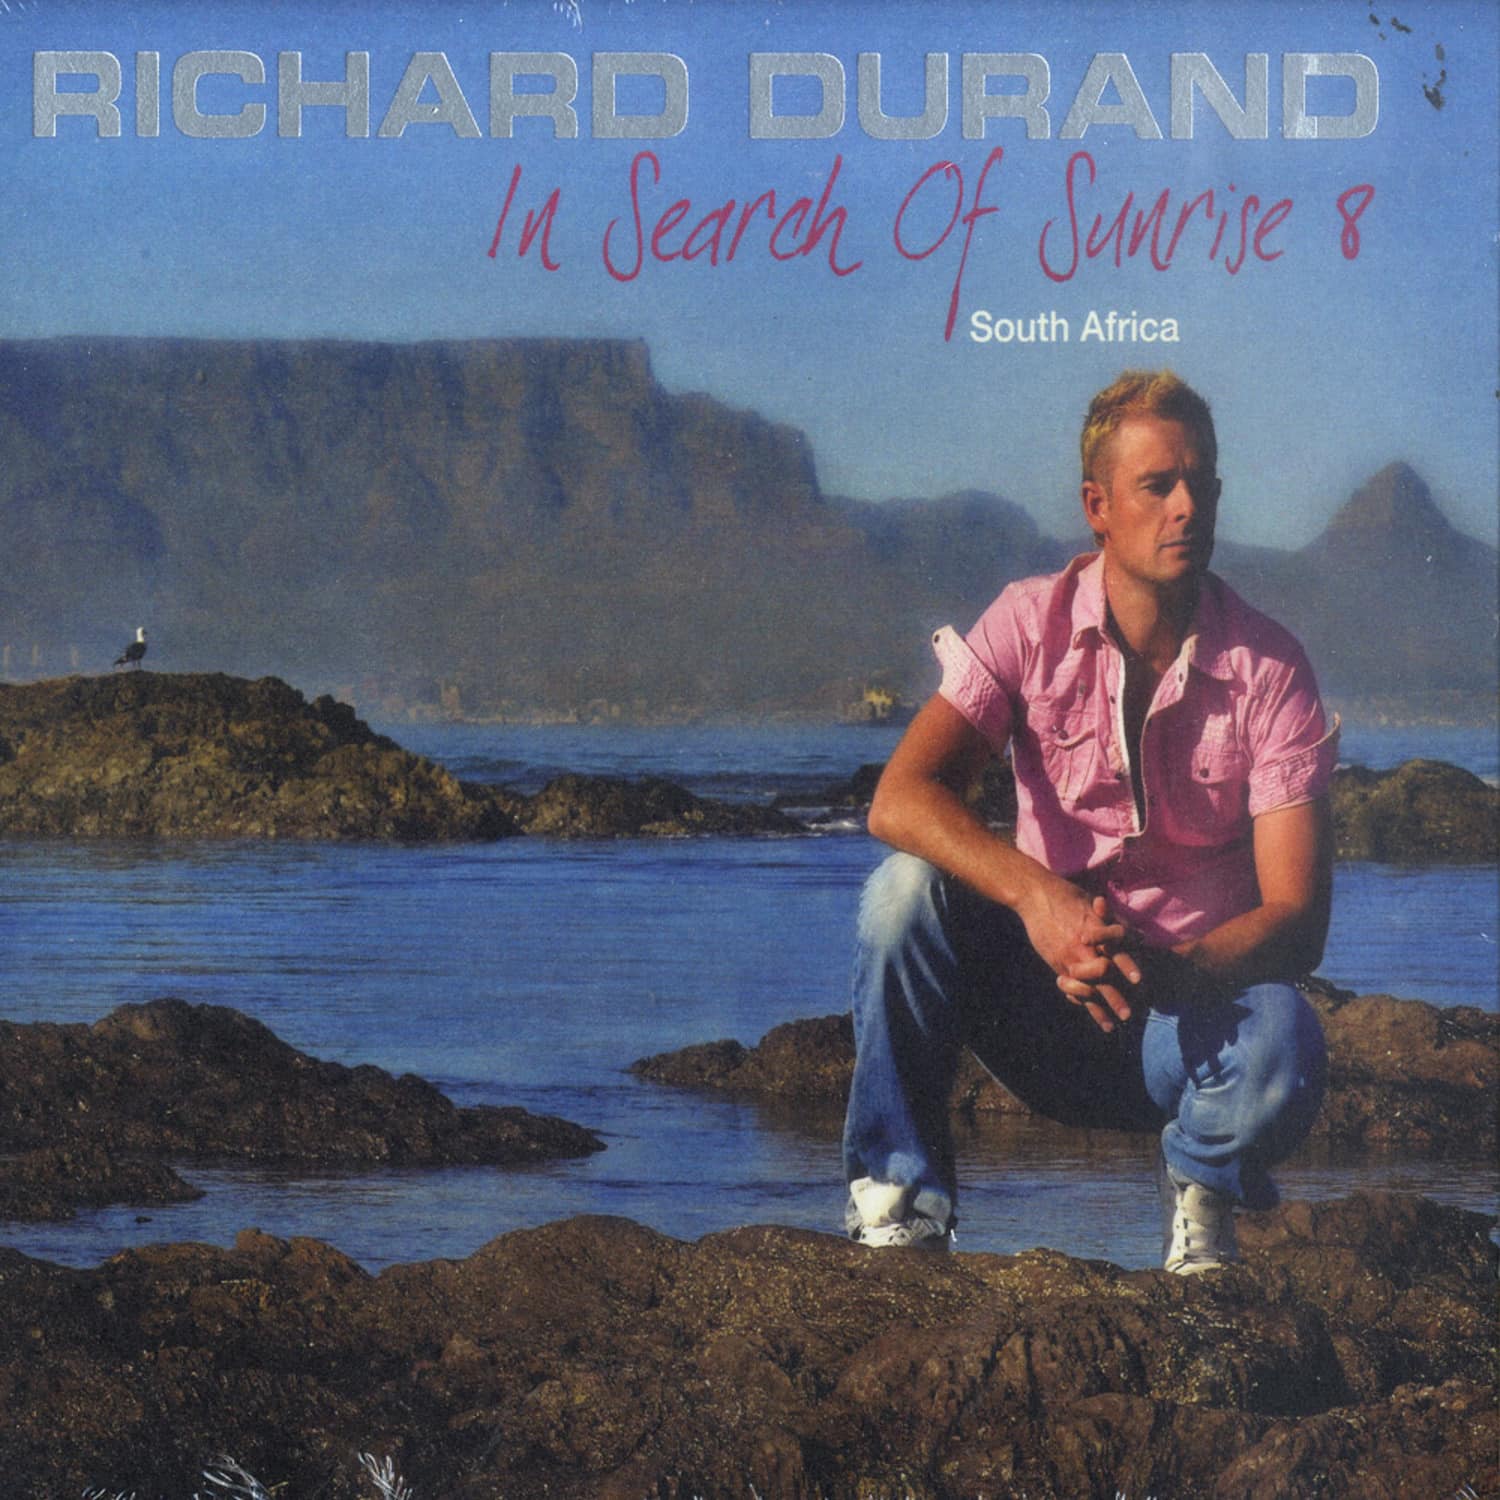 Richard Durand - IN SEARCH OF SUNRISE 8 